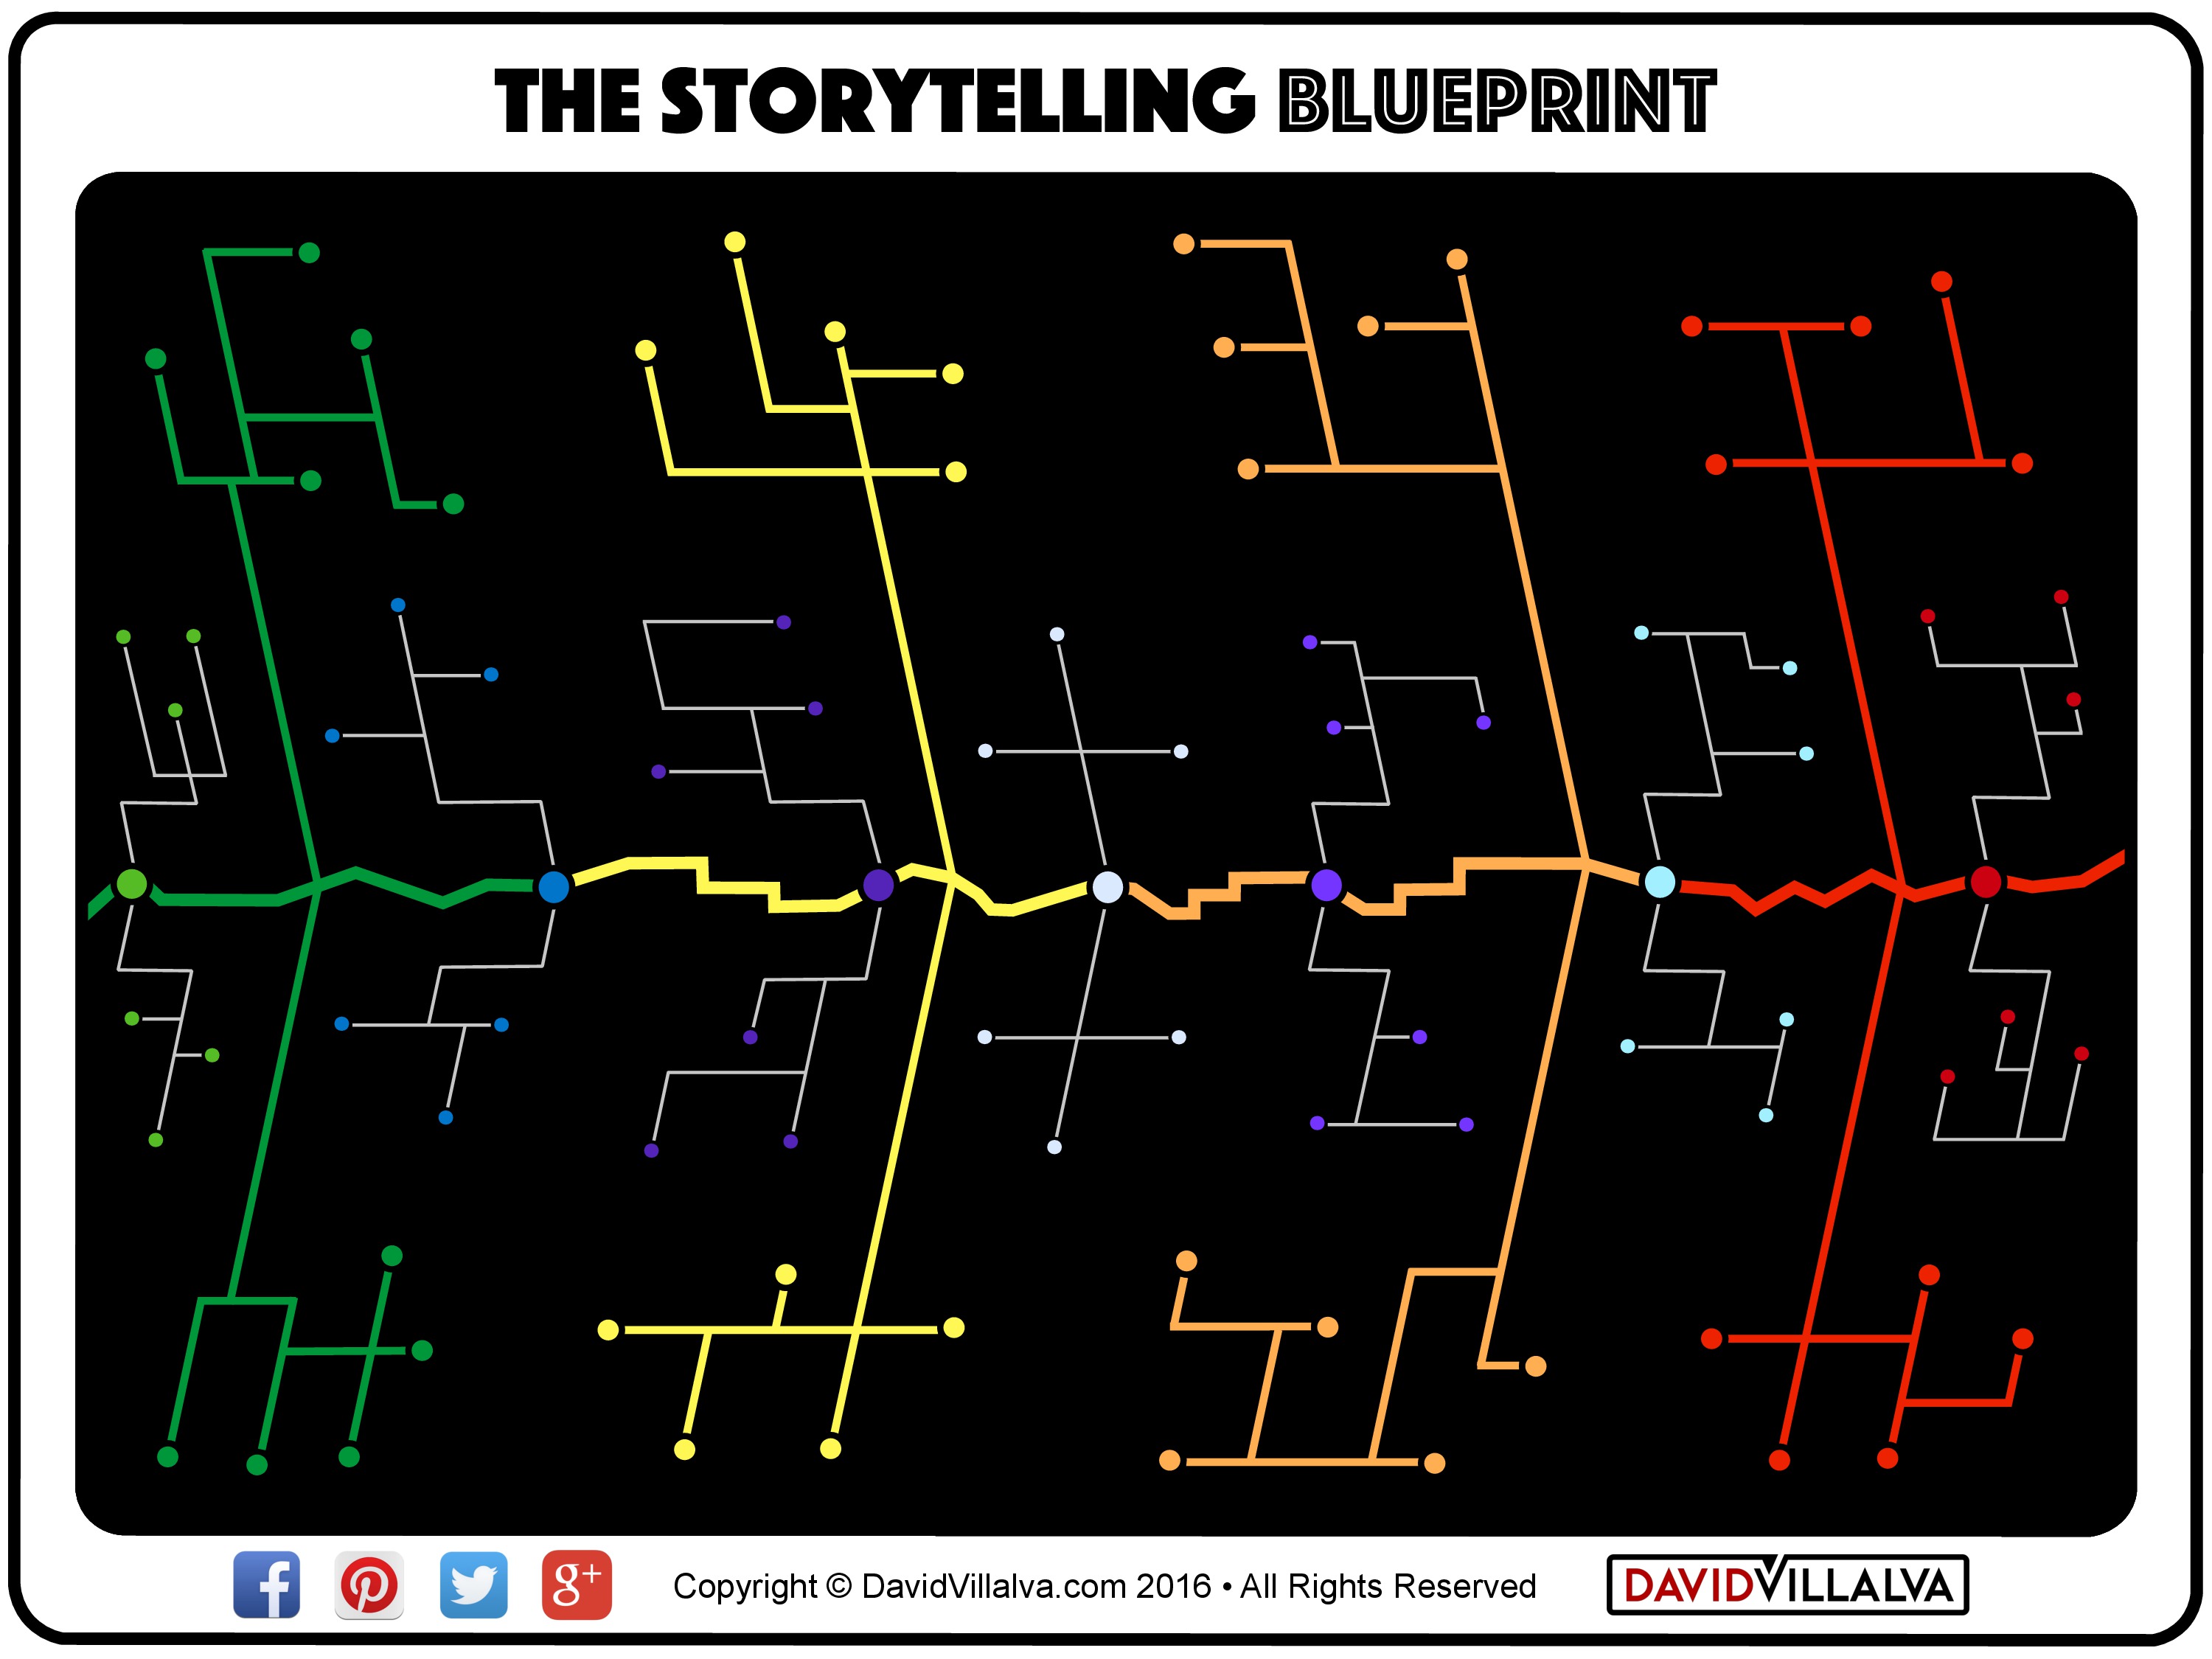 The Story Structure Blueprint